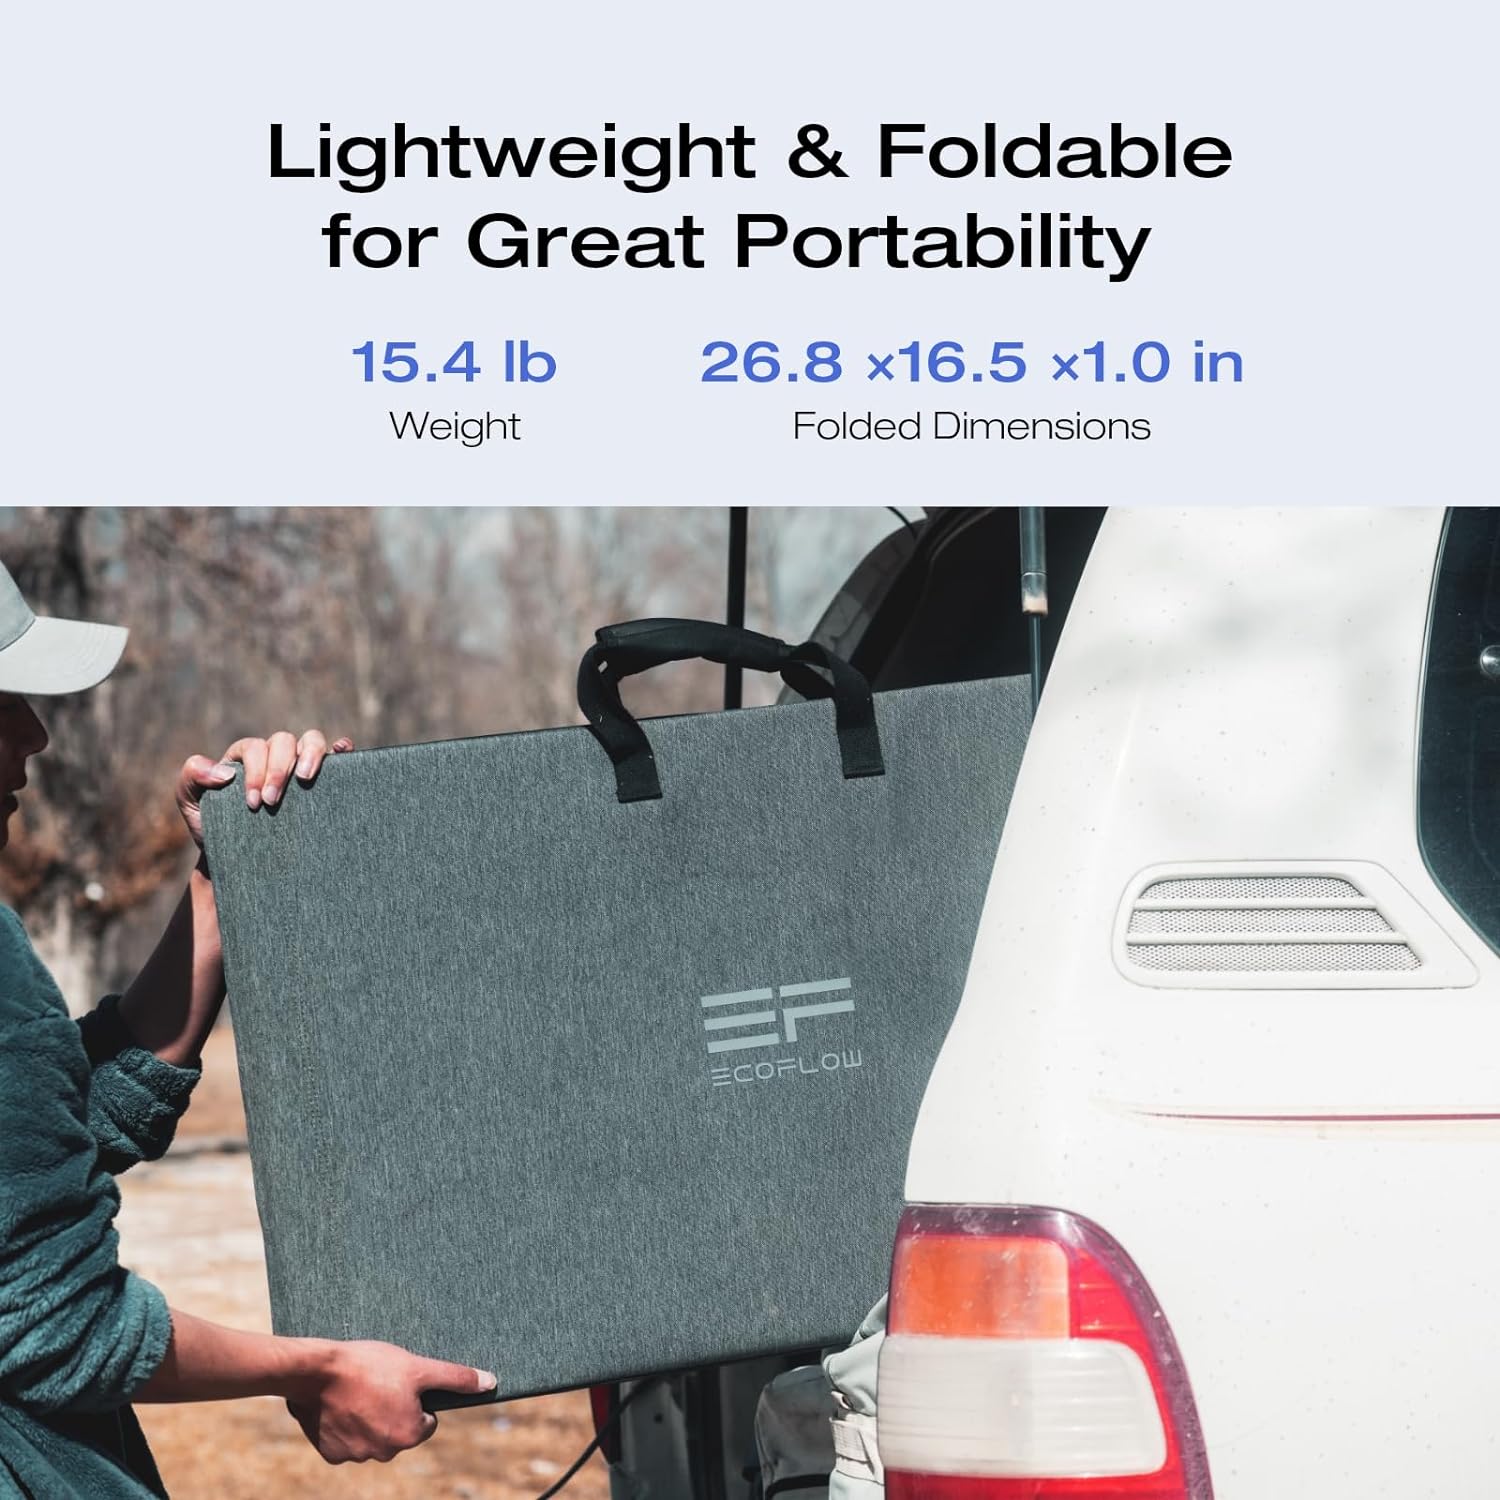 160W Portable Solar Panel for EFDELTA/RIVER Series, Foldable Solar Charger Chainable for Power Station Waterproof IP67 for Outdoor Camping RV